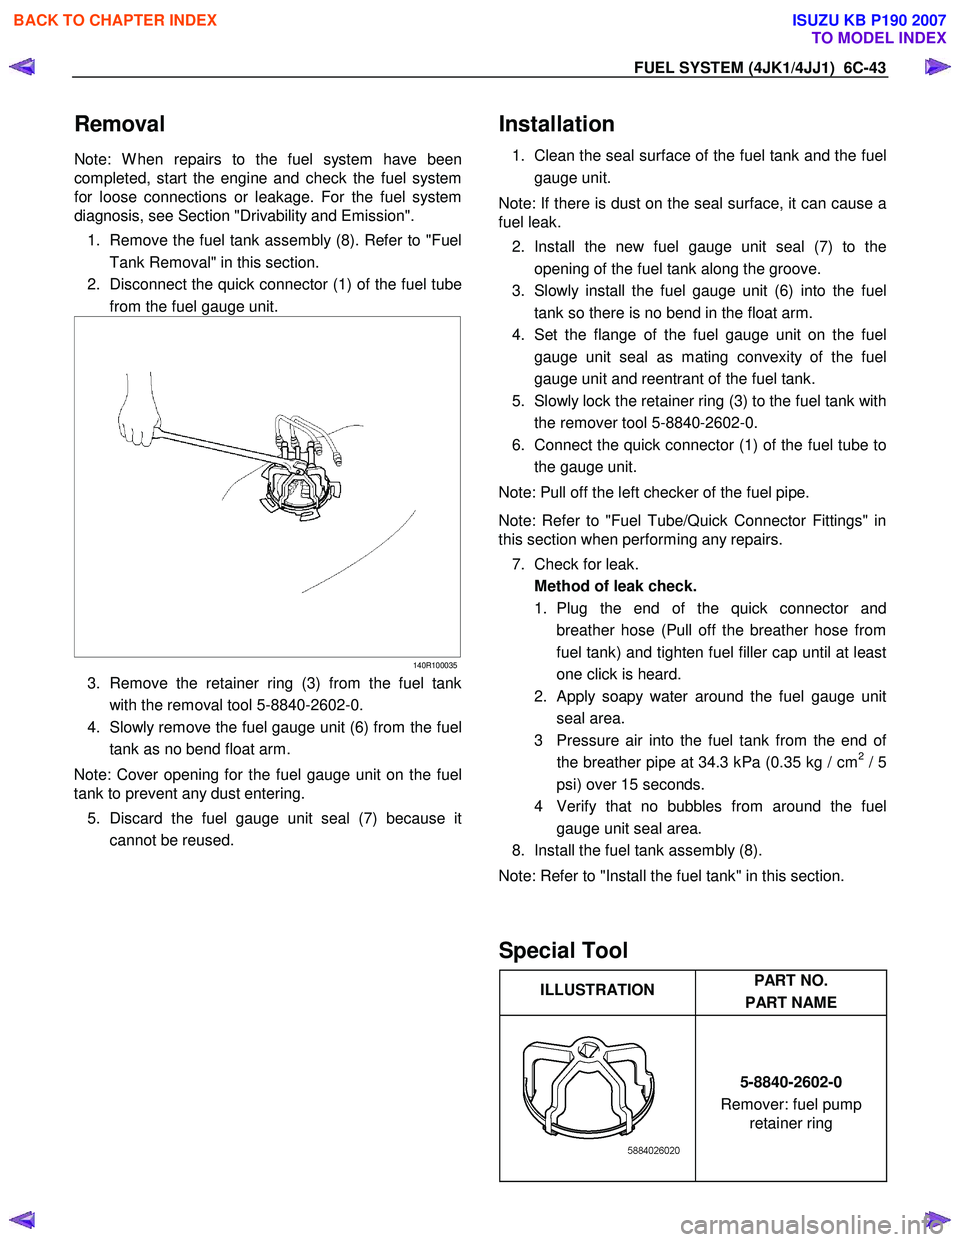 ISUZU KB P190 2007  Workshop Repair Manual FUEL SYSTEM (4JK1/4JJ1)  6C-43 
Removal 
Note: W hen repairs to the fuel system have been  
completed, start the engine and check the fuel system
for loose connections or leakage. For the fuel system
